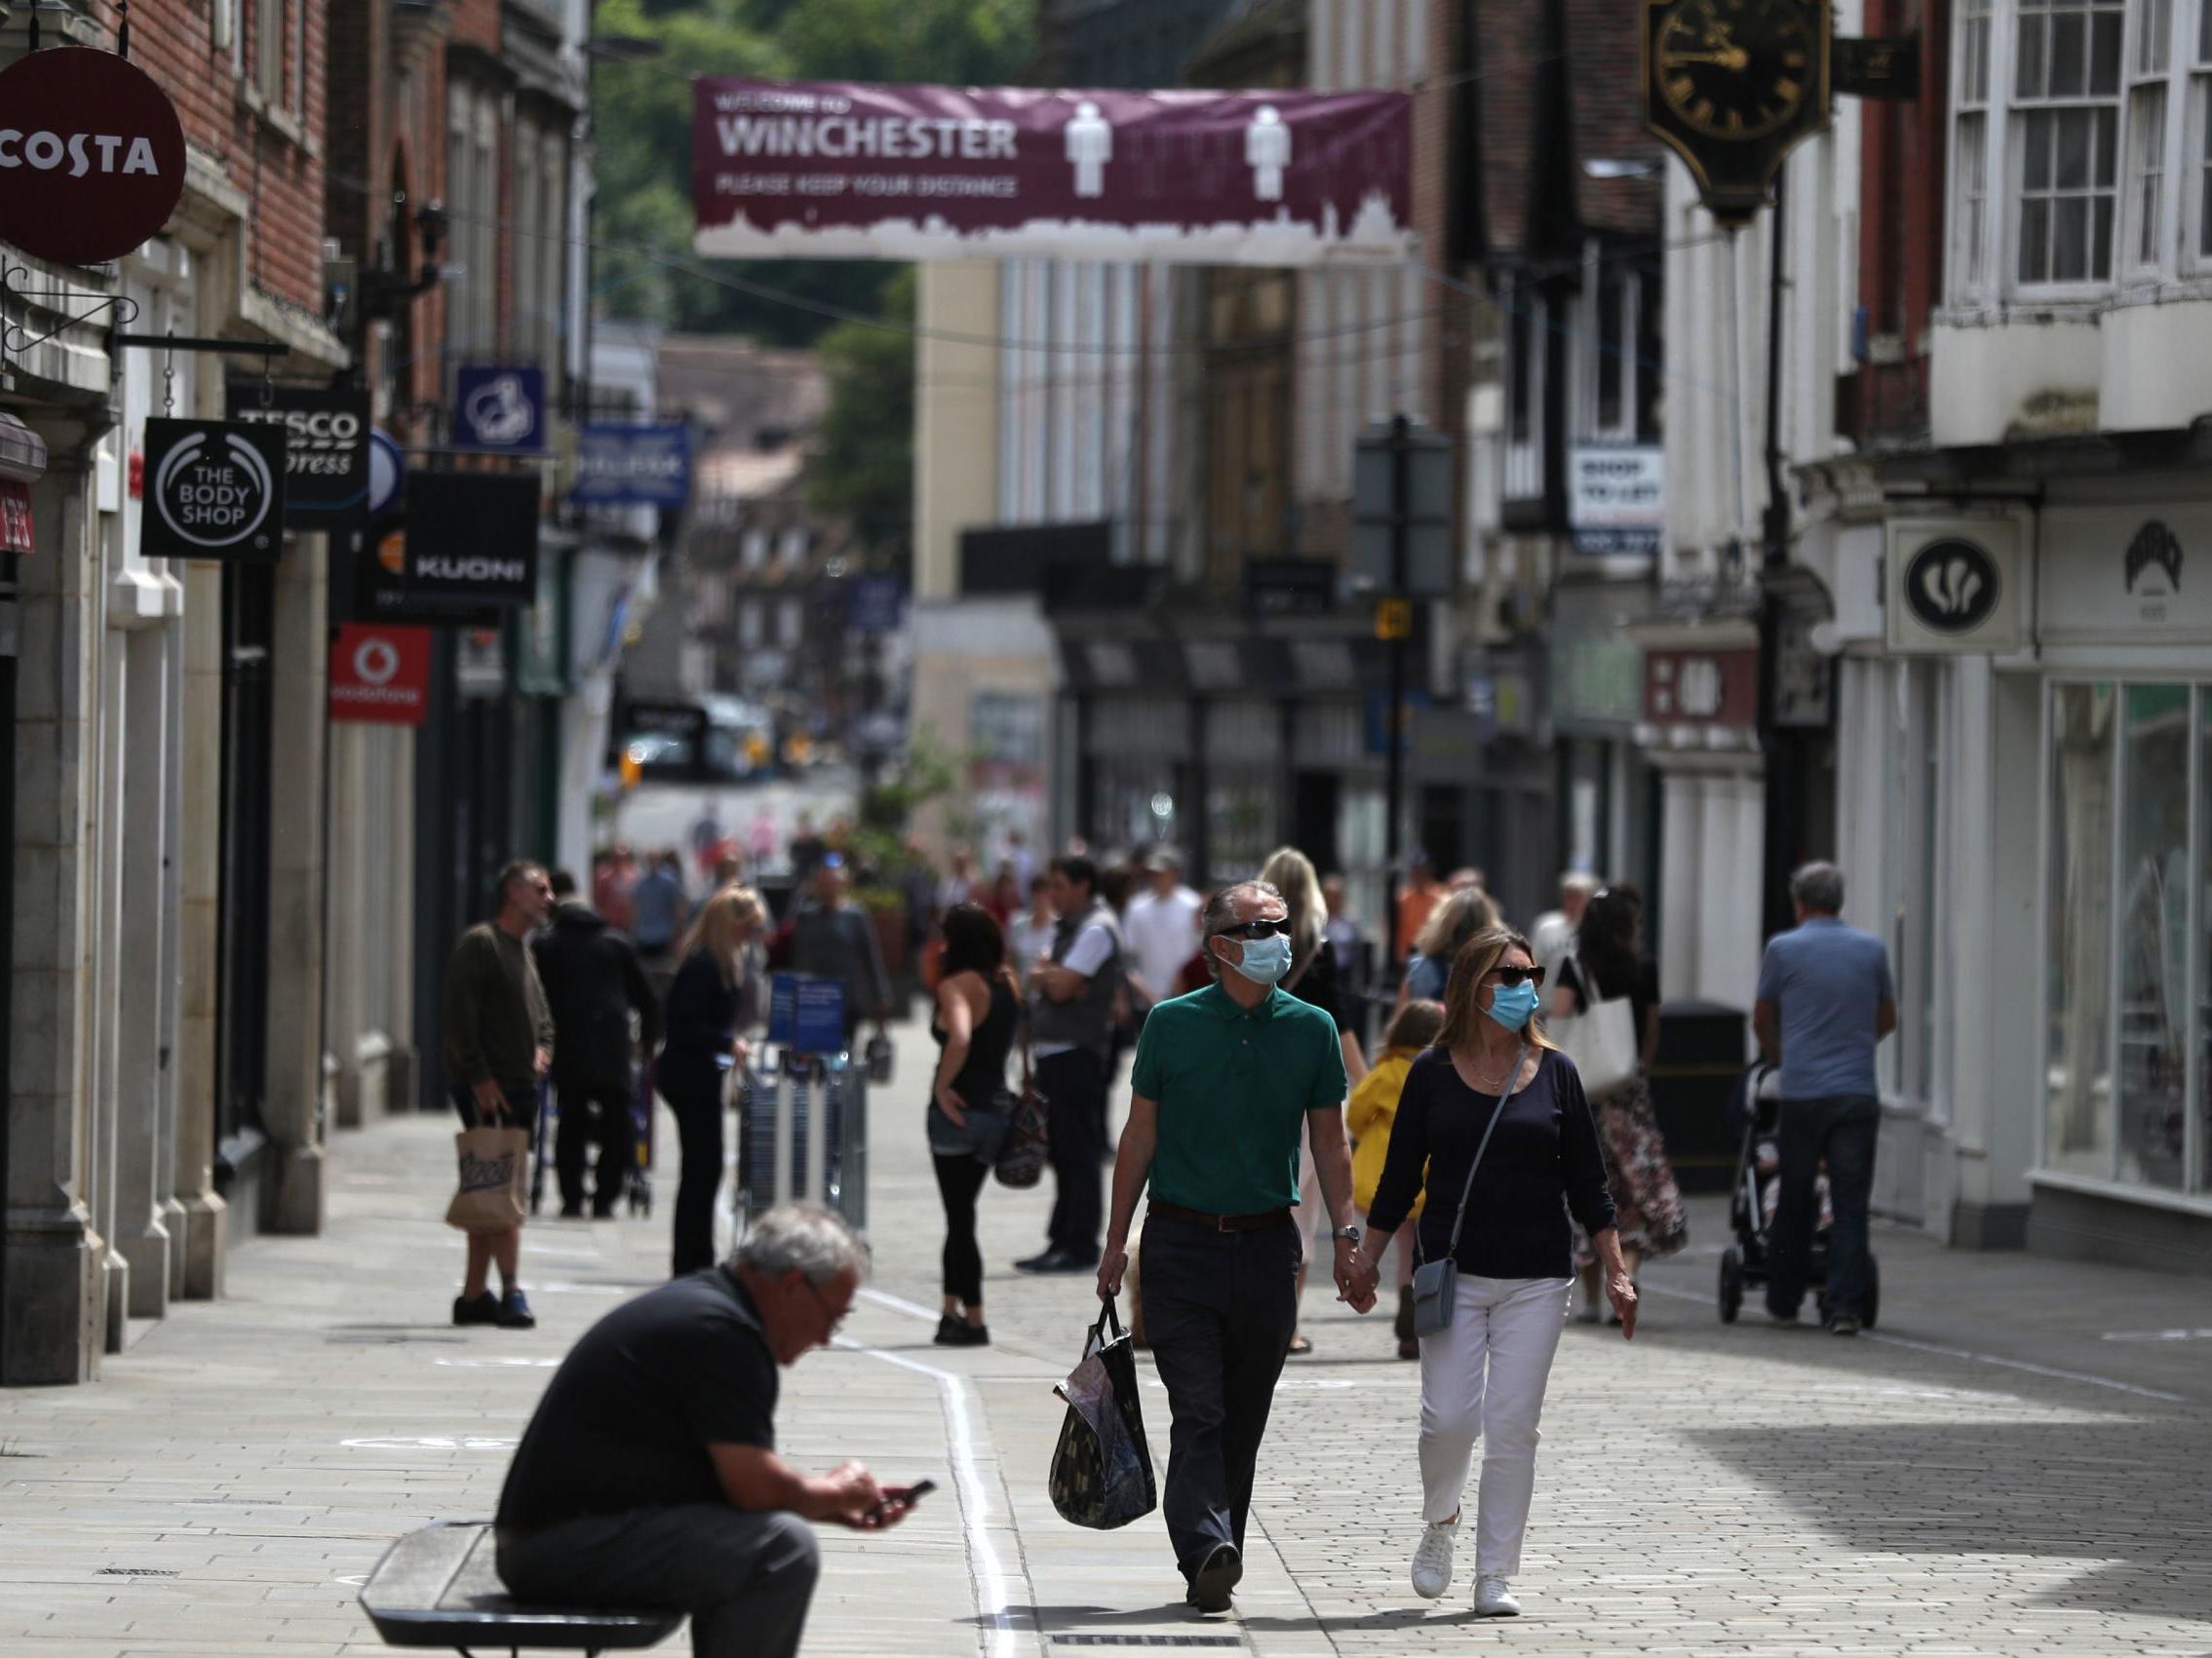 The high street has been hit hard by the lockdown